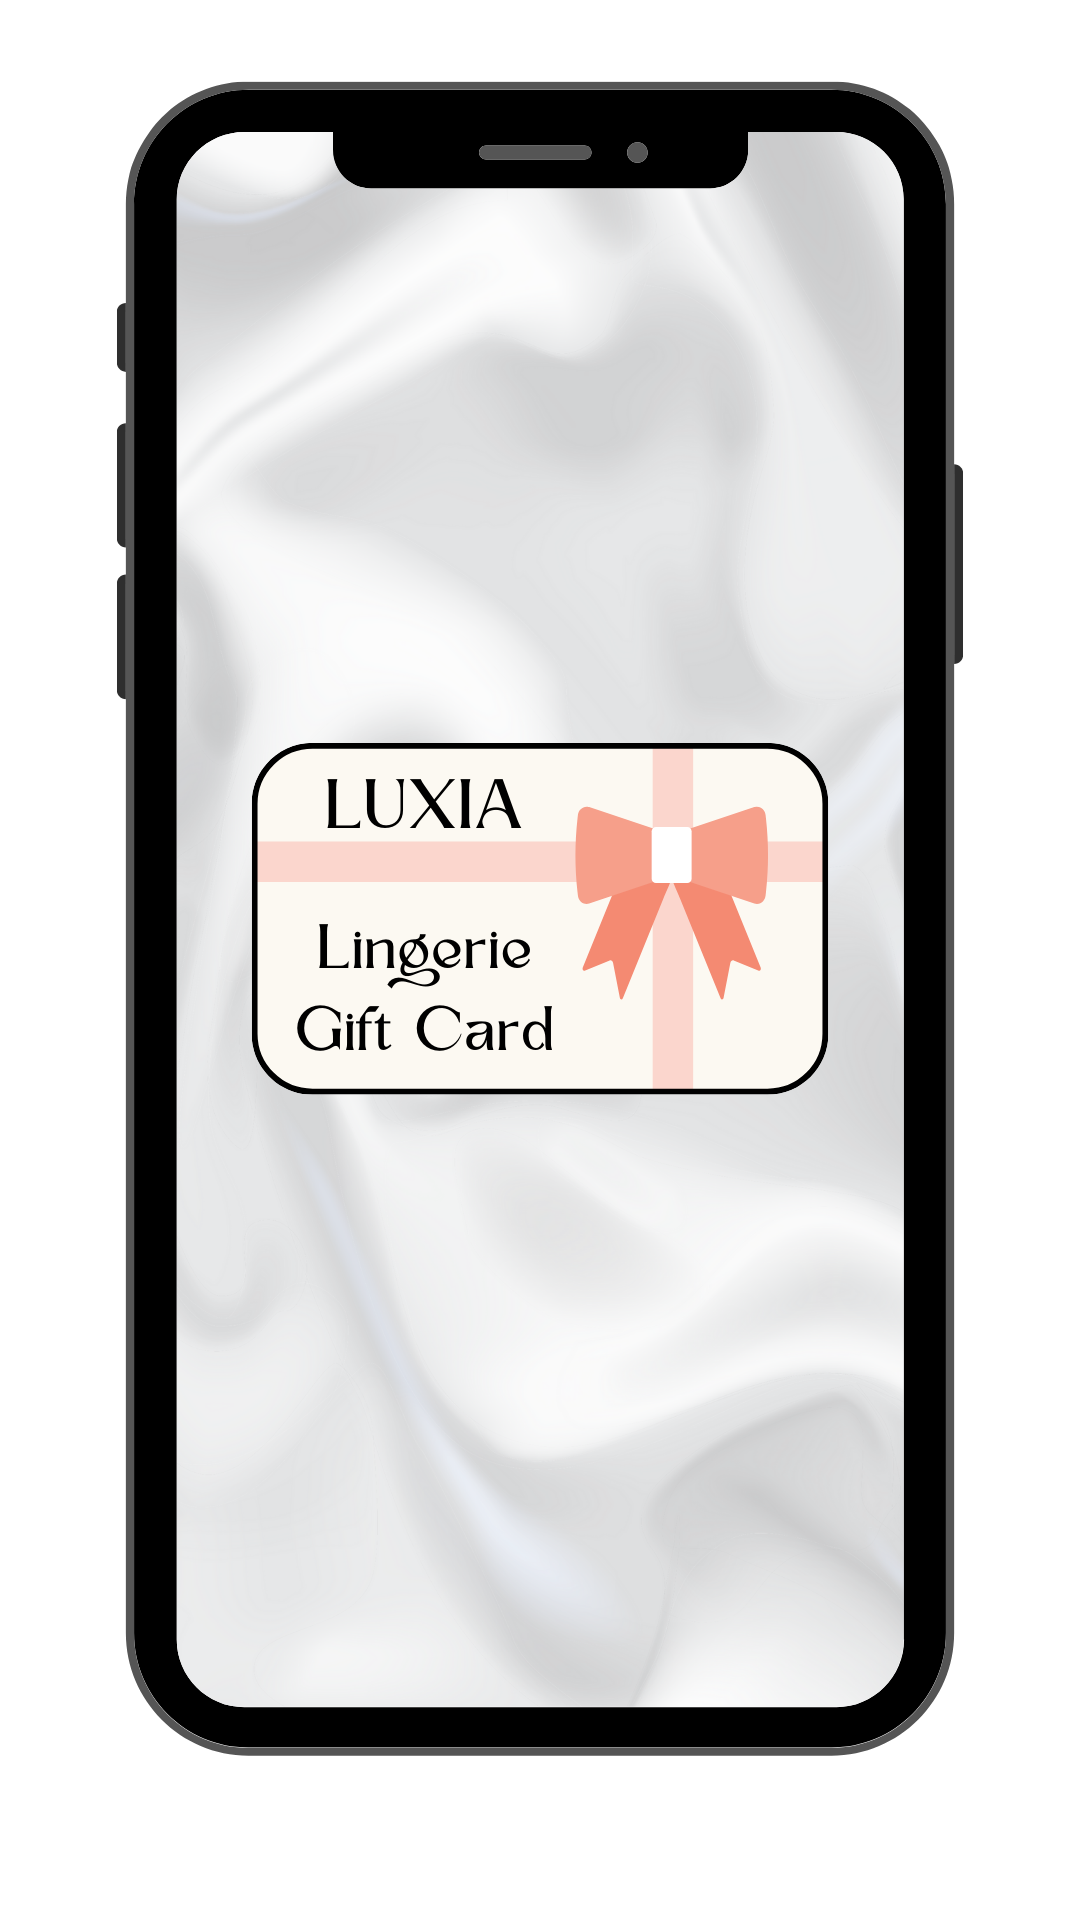 LUXIA GIFT CARD